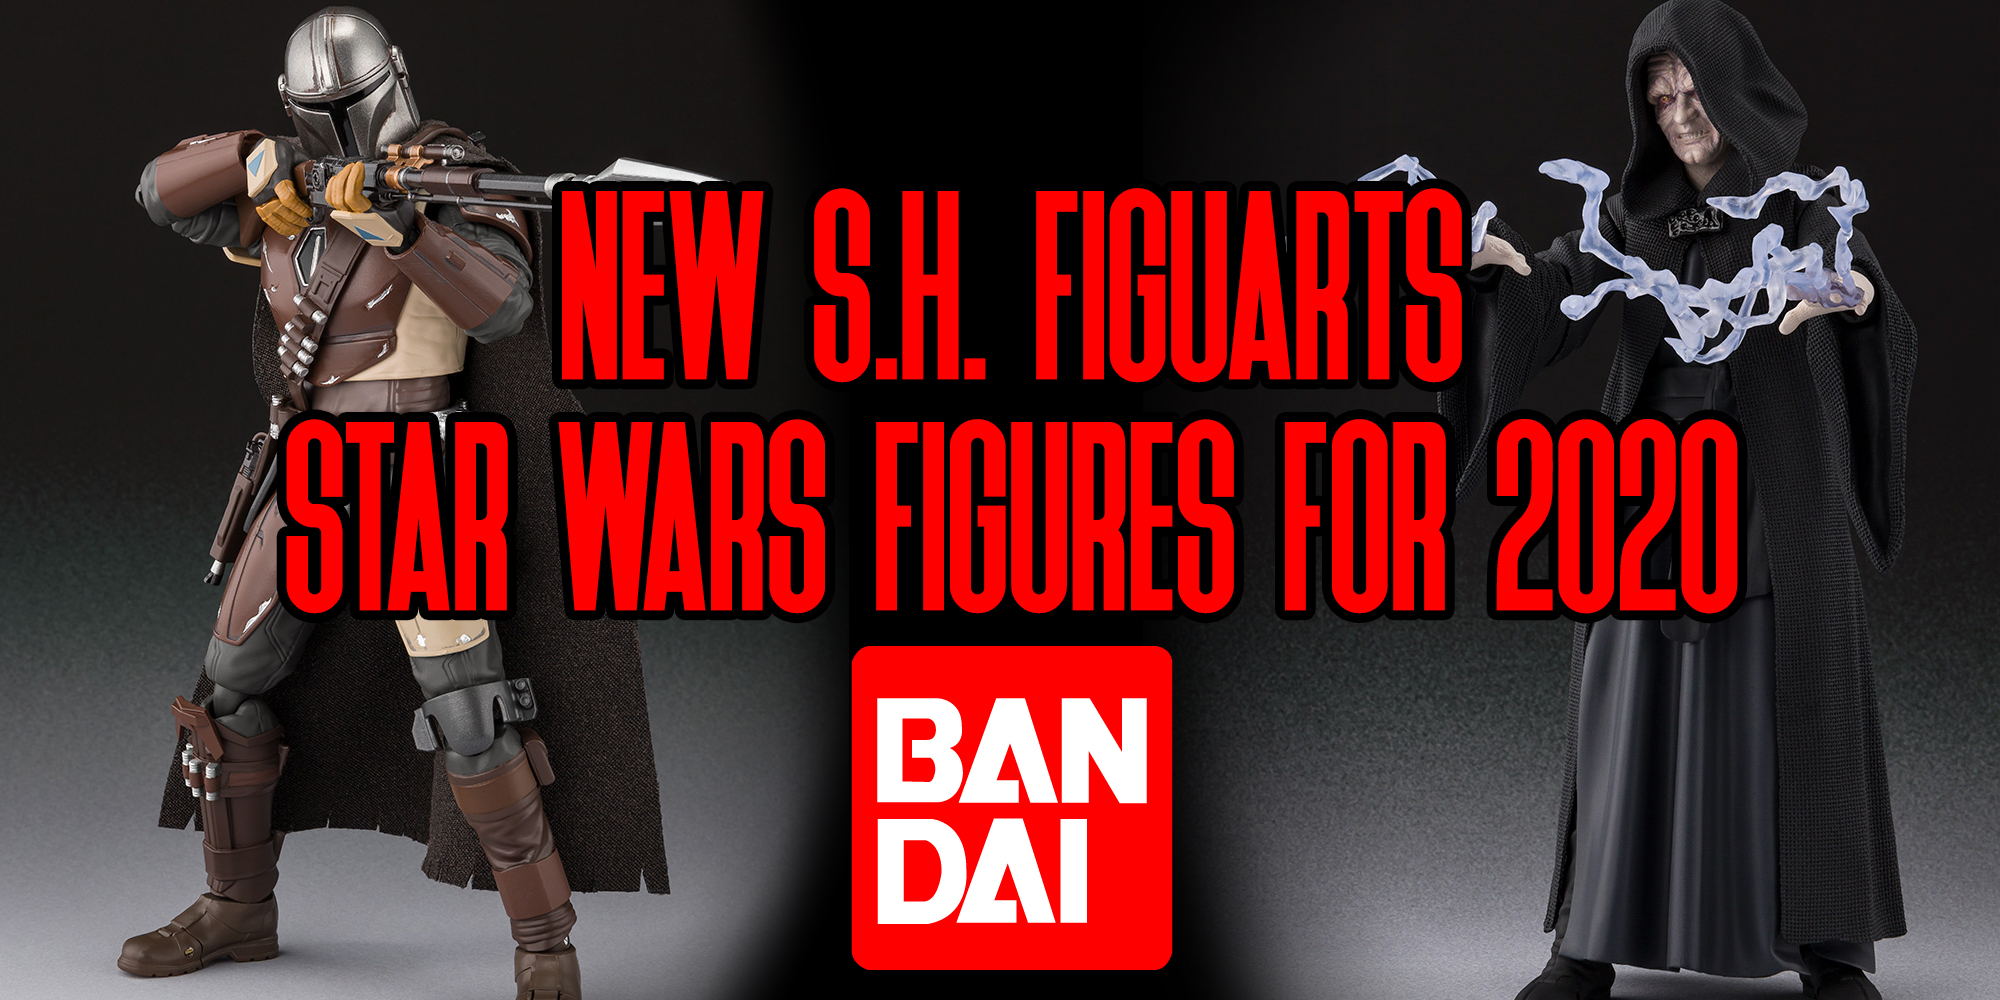 New S.H. Figuarts Star Wars Figures For 2020!